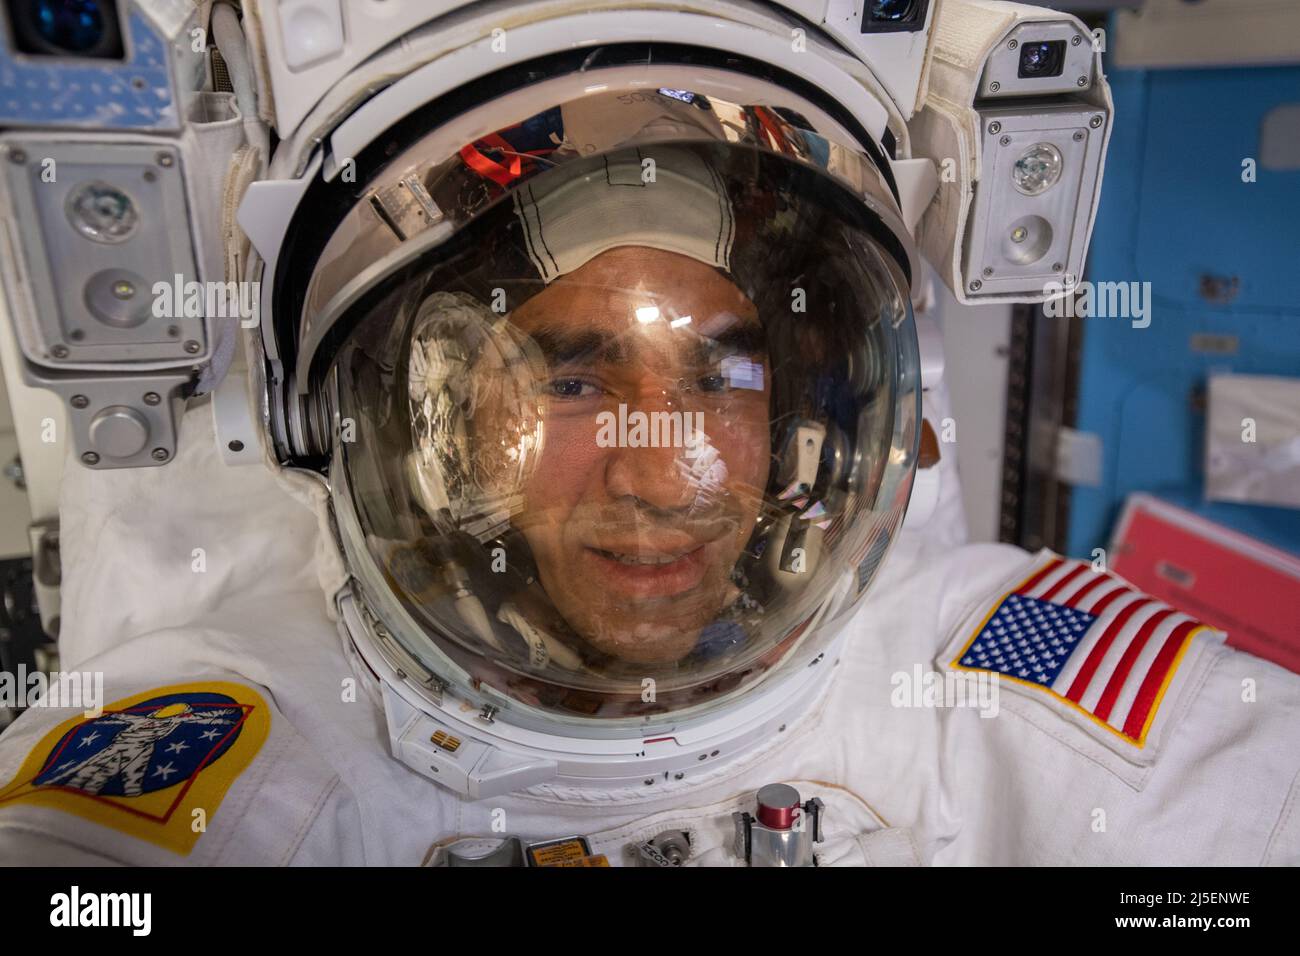 International Space Station, EARTH ORBIT. 23 March, 2022. NASA astronaut and Expediution 66 Flight Engineer Raja Chari takes a selfie during a six-hour and 54-minute spacewalk to install thermal gear and electronic components on the International Space Station, March 23, 2022 in Earth Orbit.  Credit: NASA/NASA/Alamy Live News Stock Photo